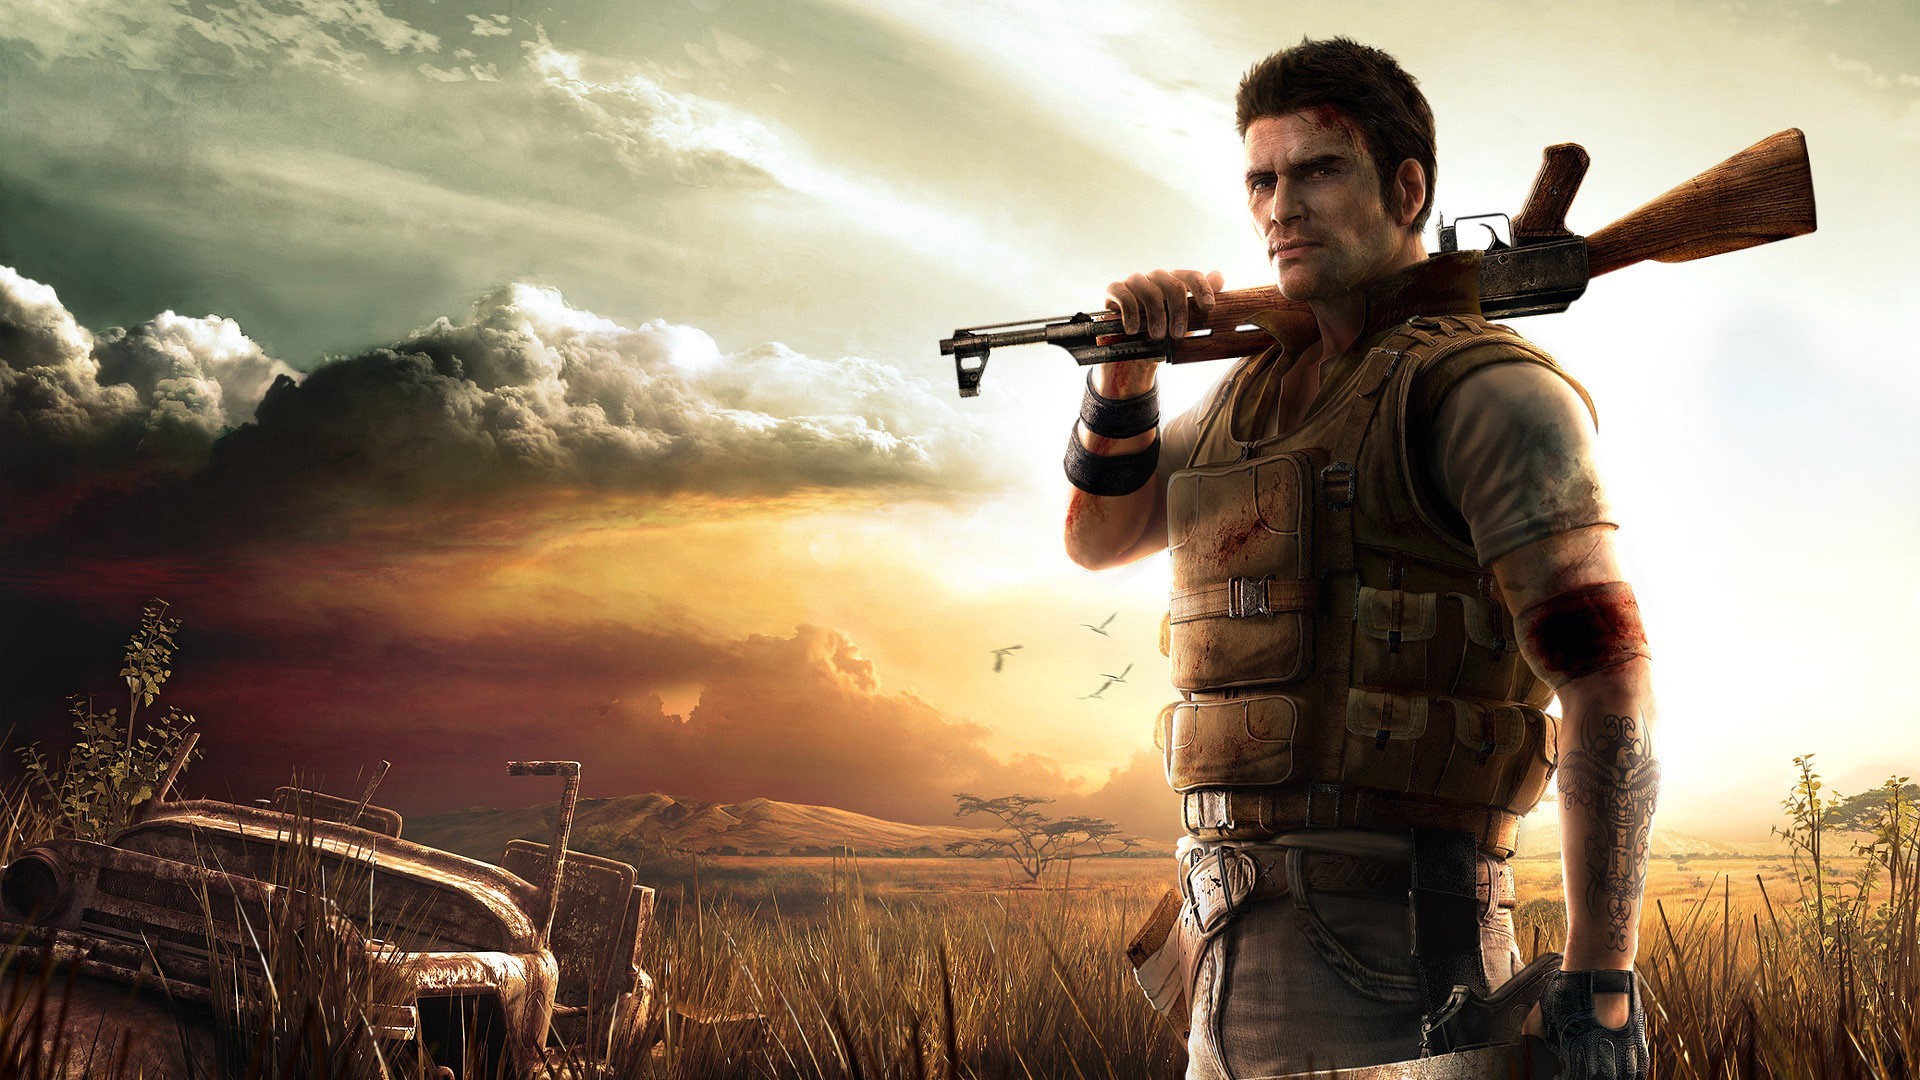 General 1920x1080 video games digital art Far Cry 2 weapon Africa Ubisoft video game art 2008 (Year) sky video game men